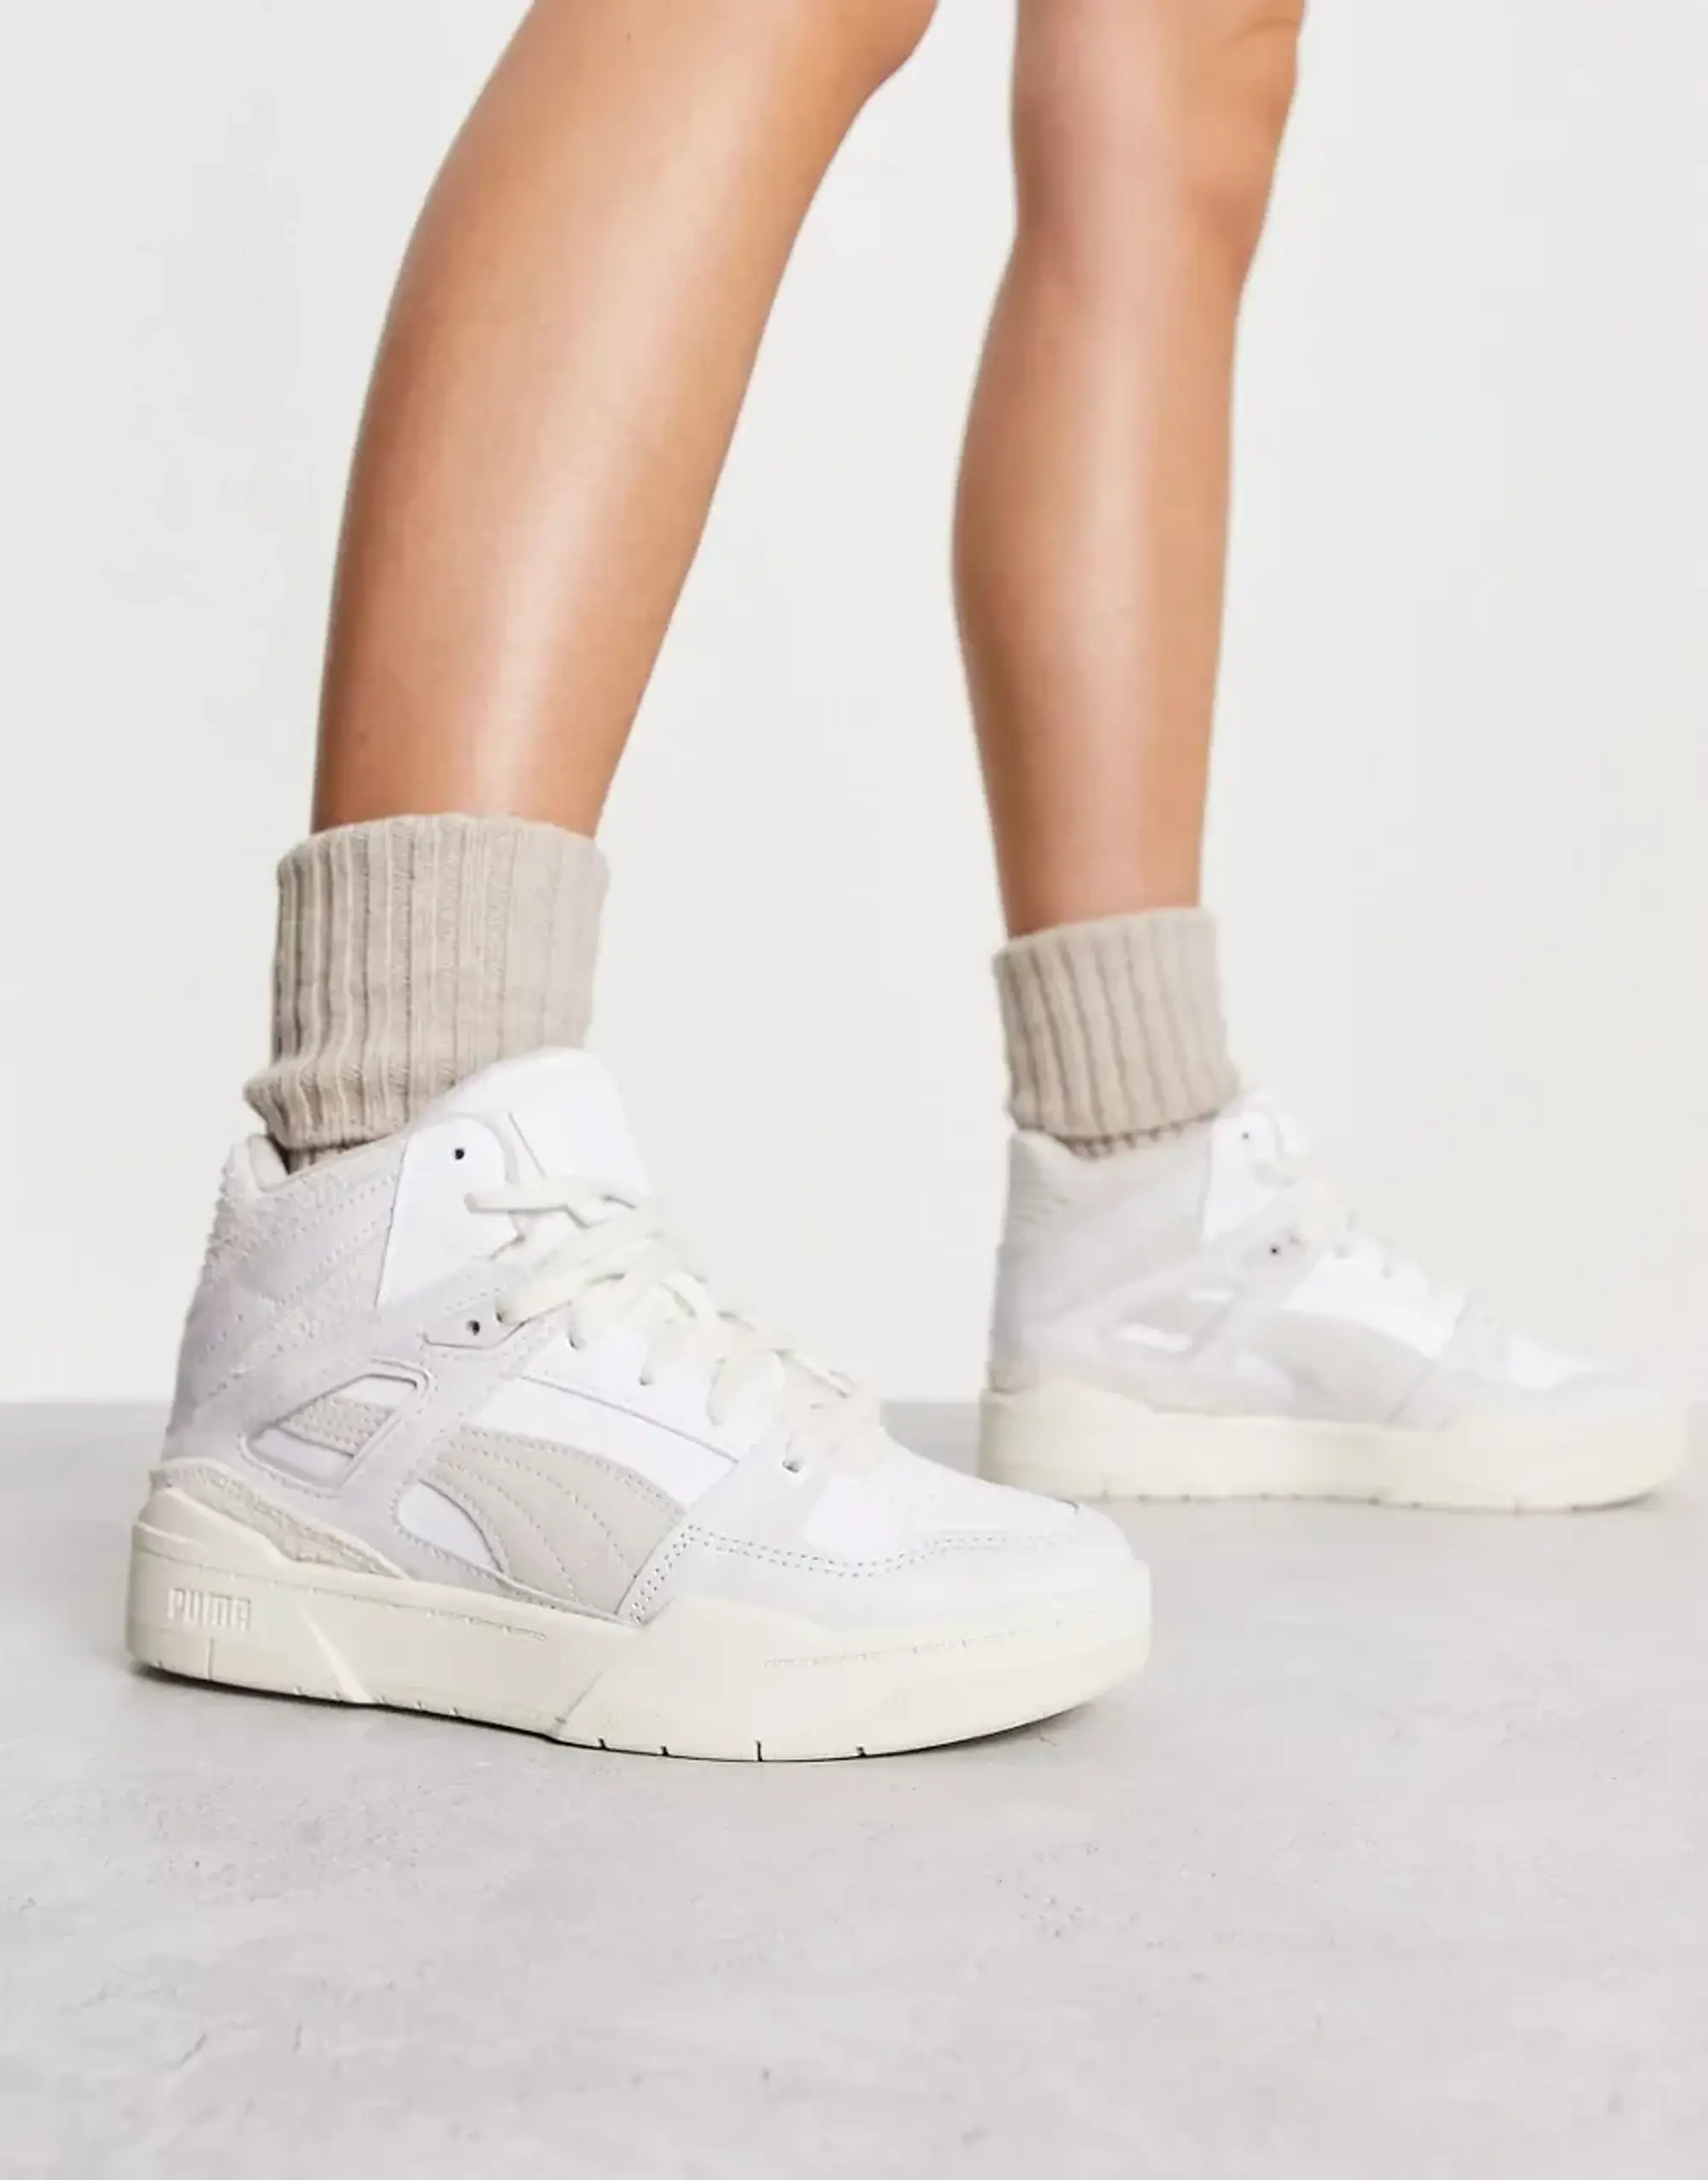 Puma Slipstream Mid Textured Neutral Trainers In White And Feather Grey